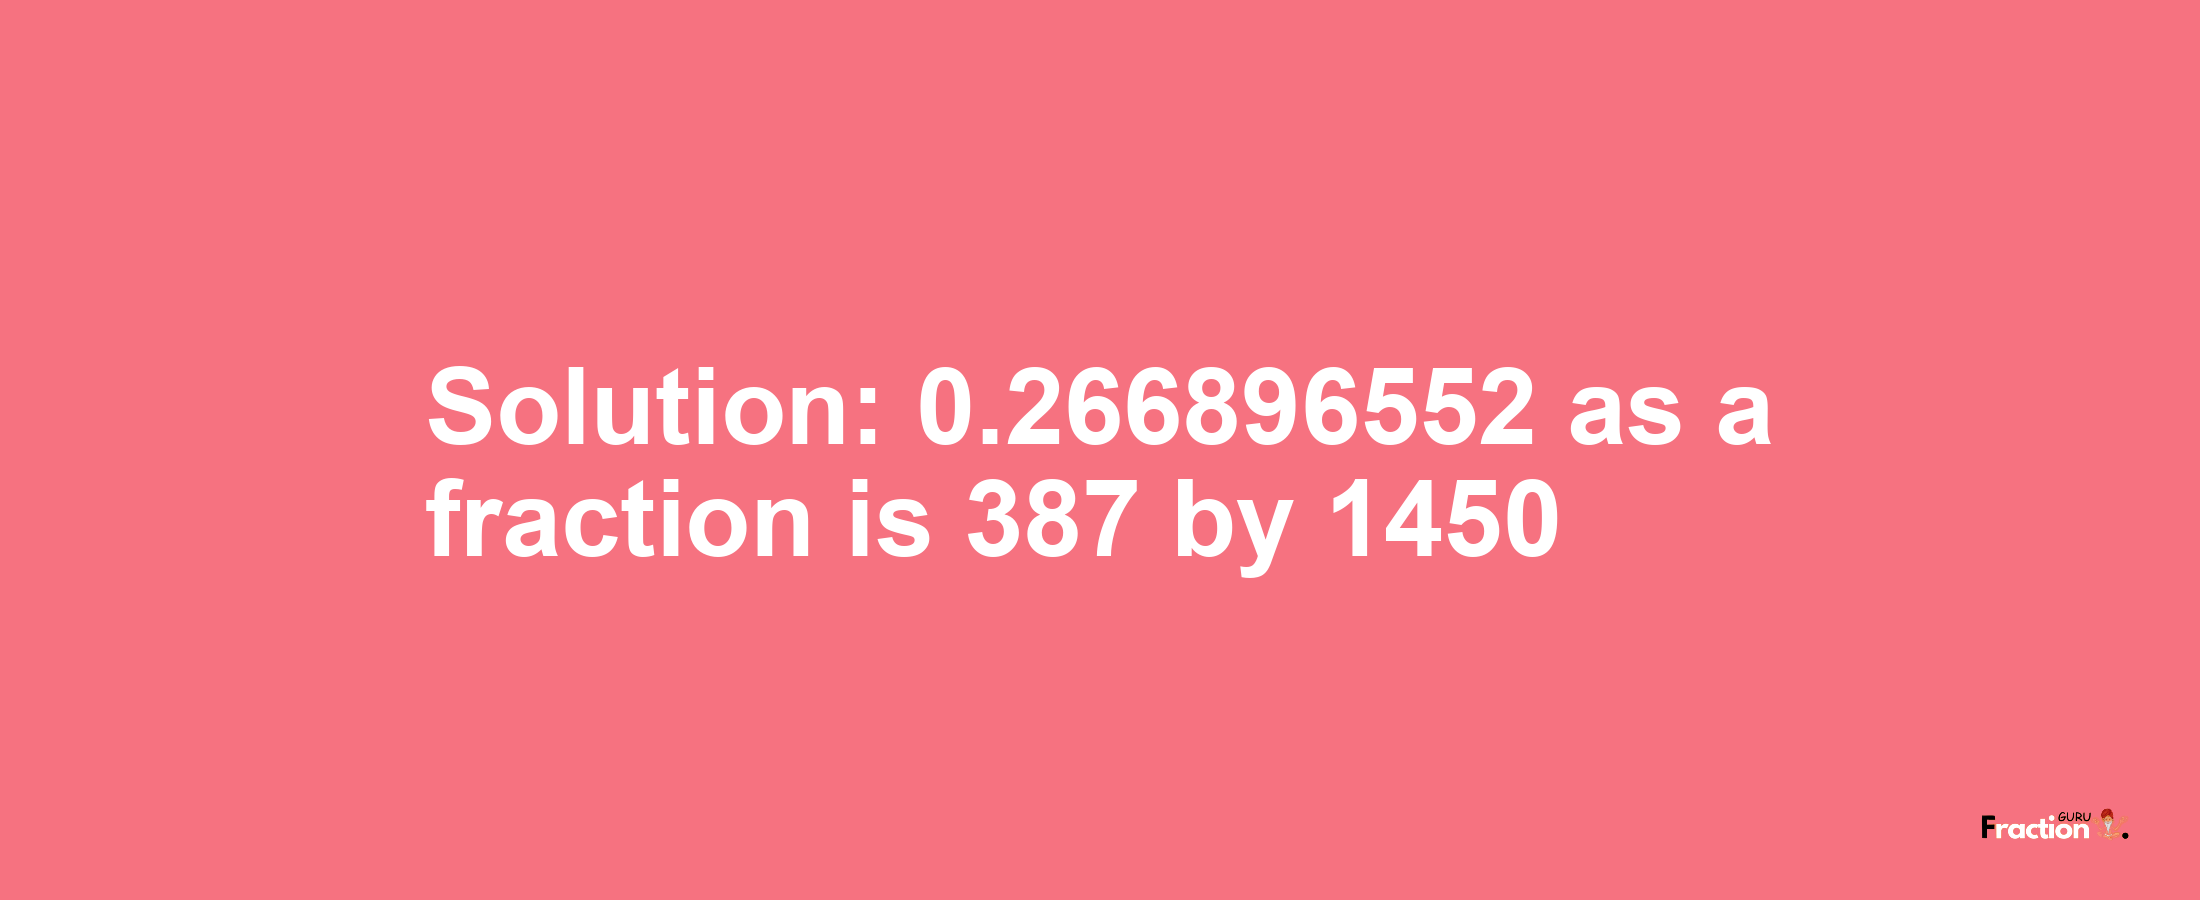 Solution:0.266896552 as a fraction is 387/1450